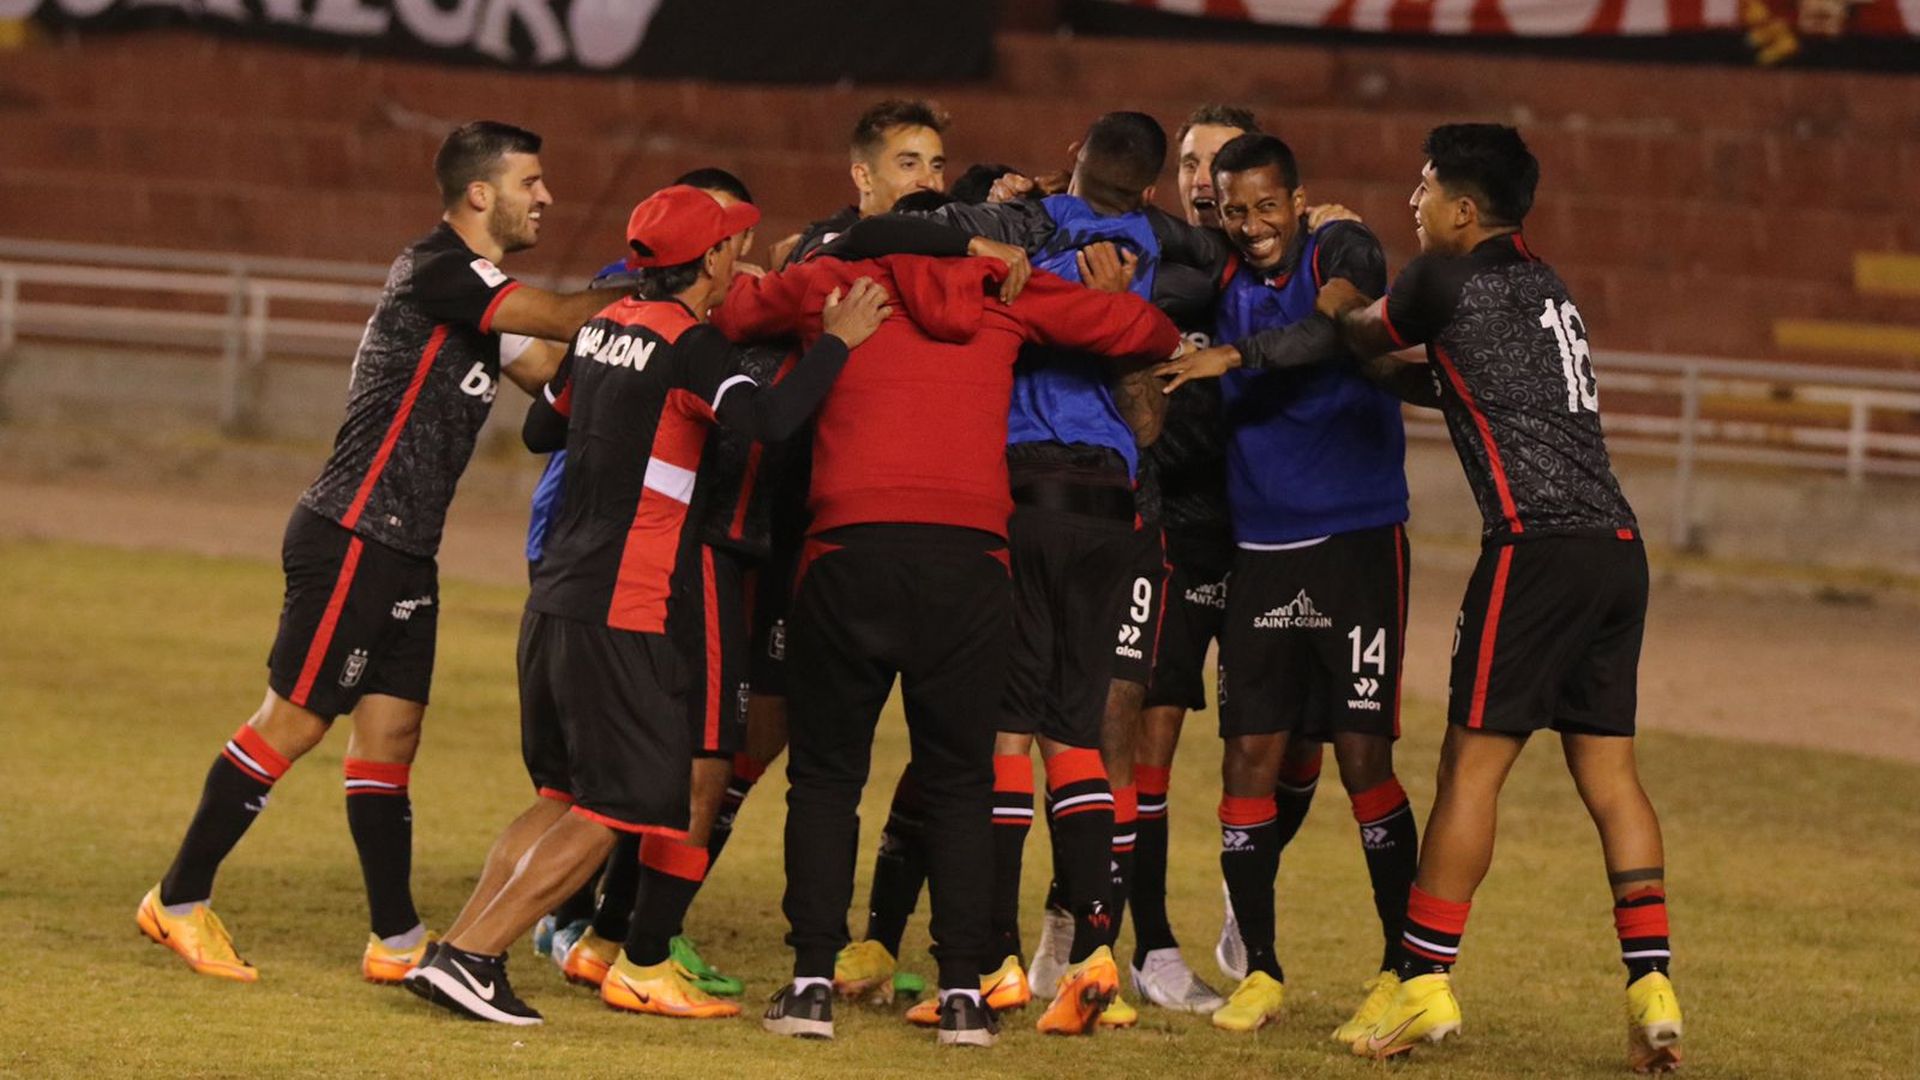 Melgar defeated Cantolao for date 7 of the Closing Tournament of League 1. (From Chalaca).